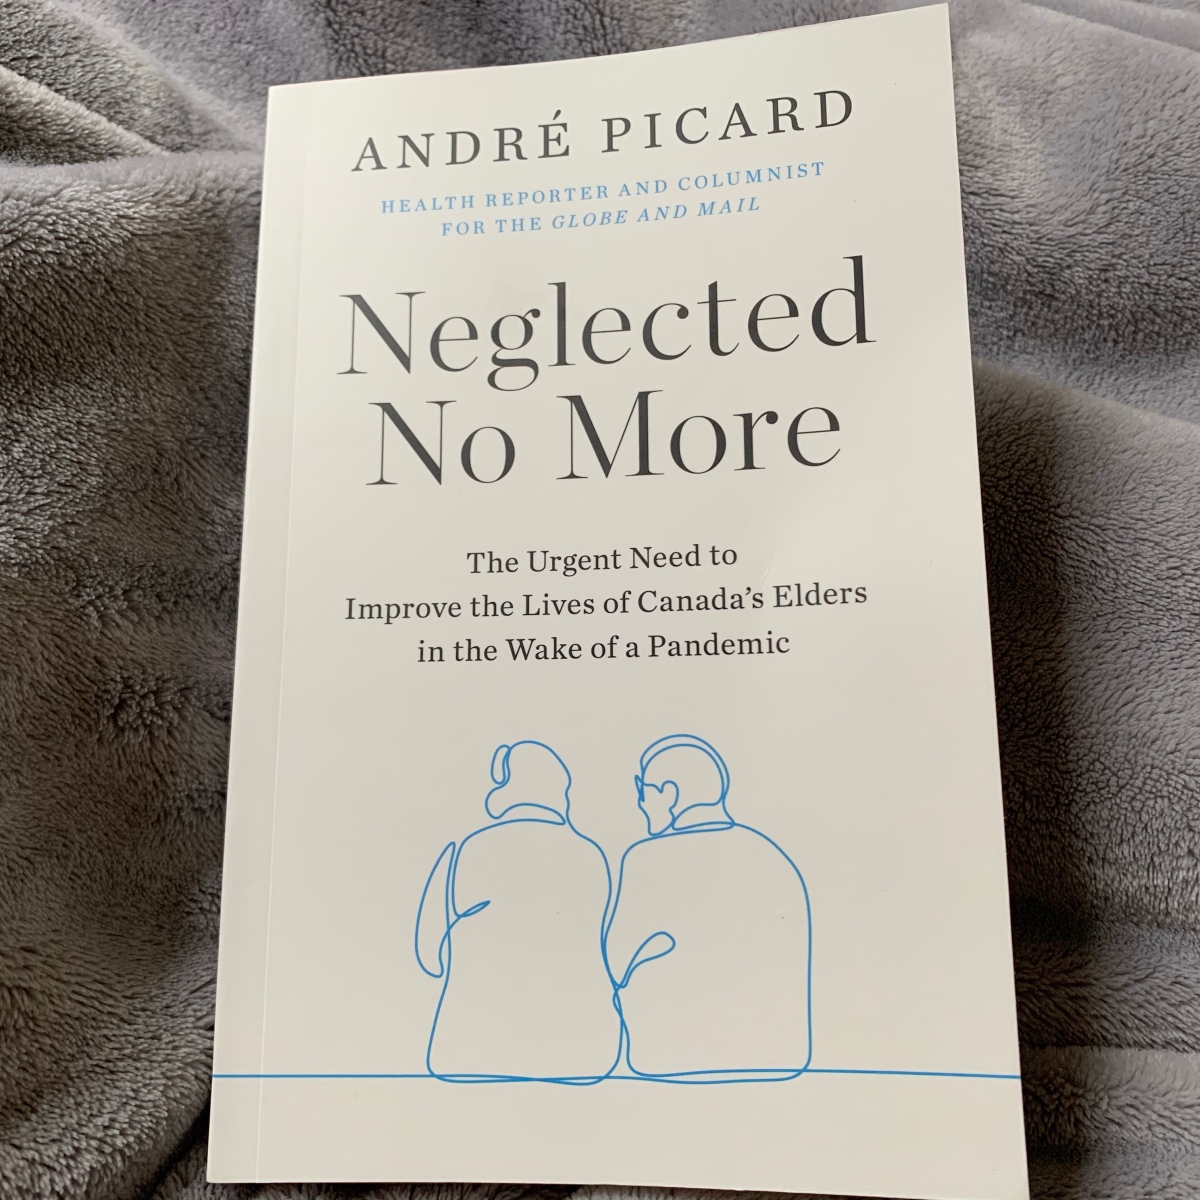 ‘Neglected No More’ by André Picard